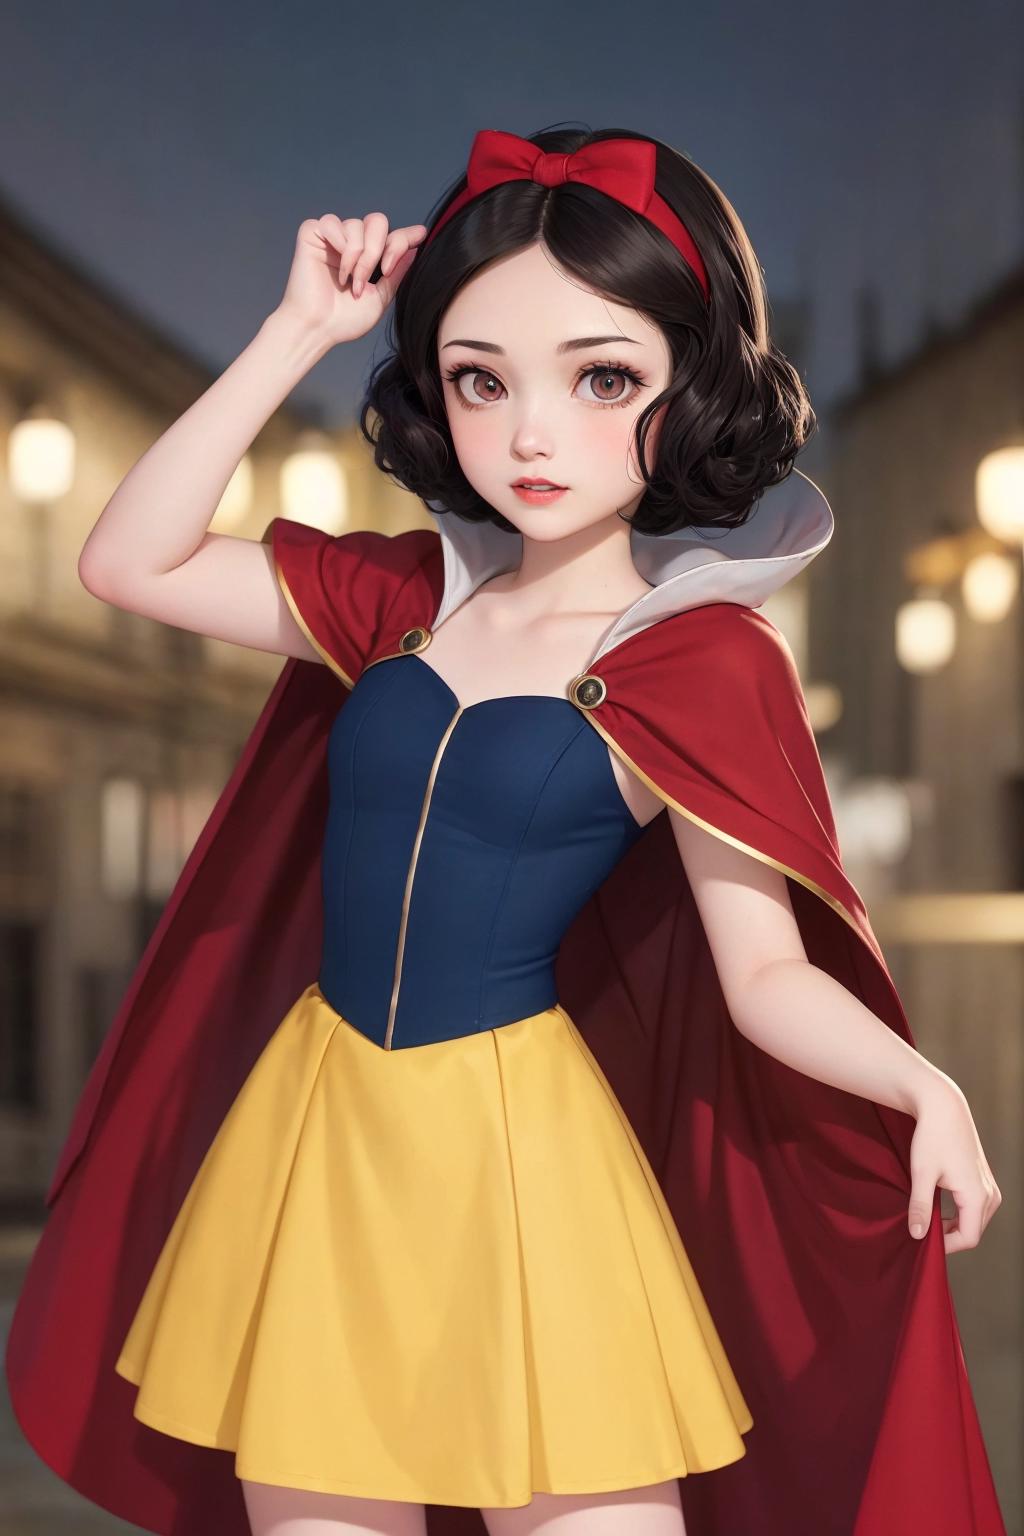 3D Animation of a Disney Princess in a Blue Dress and Red Cape.